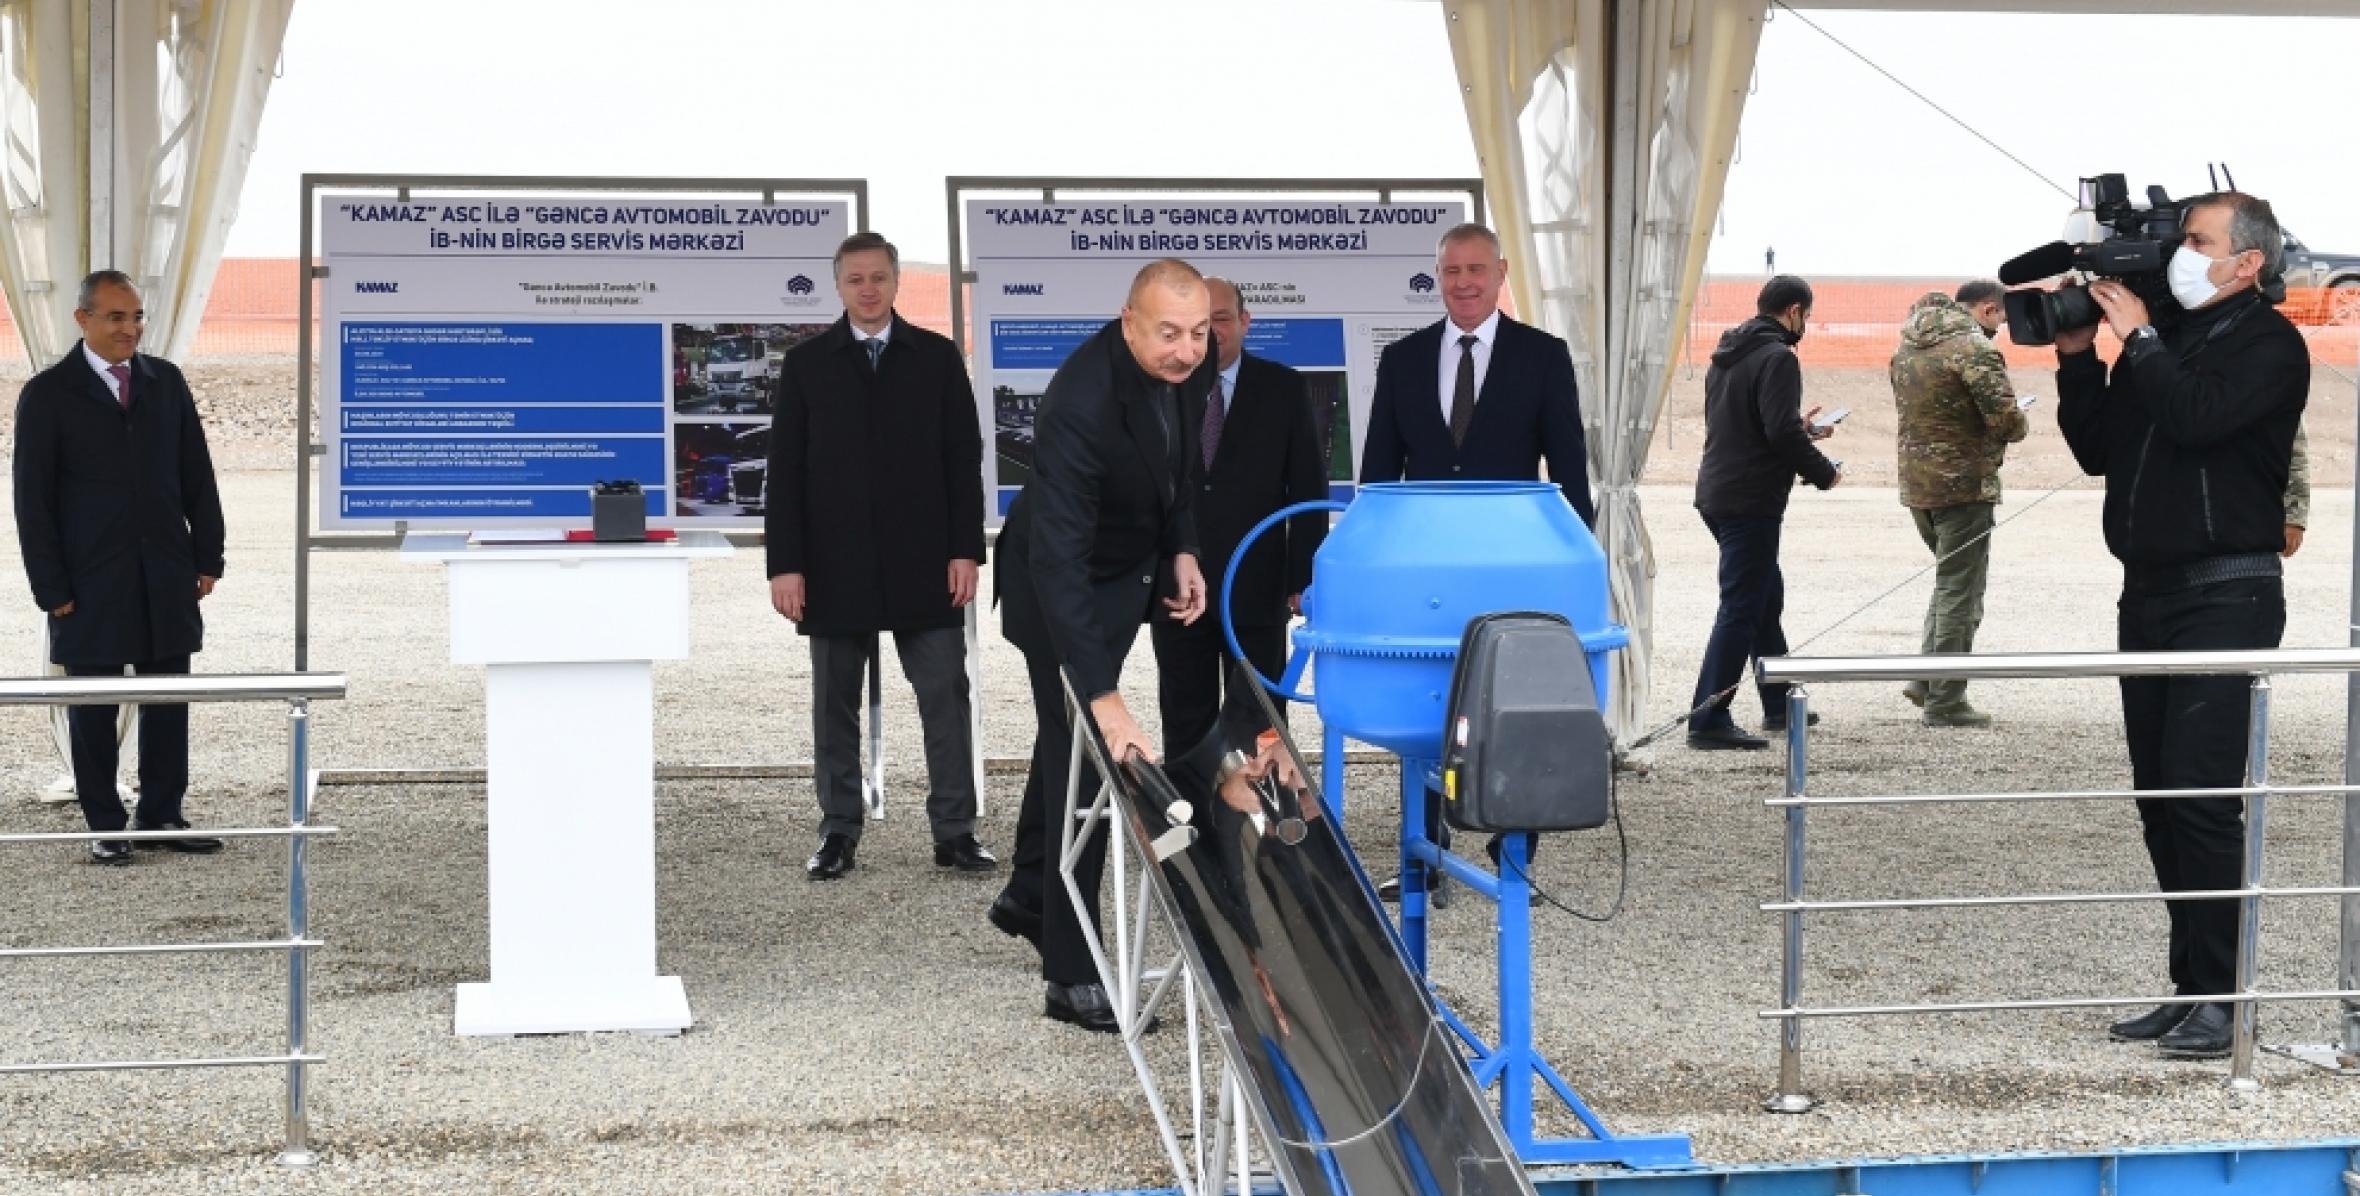 Ilham Aliyev attended groundbreaking ceremony of joint service center of KAMAZ OJSC and Ganja Automobile Plant Production Association